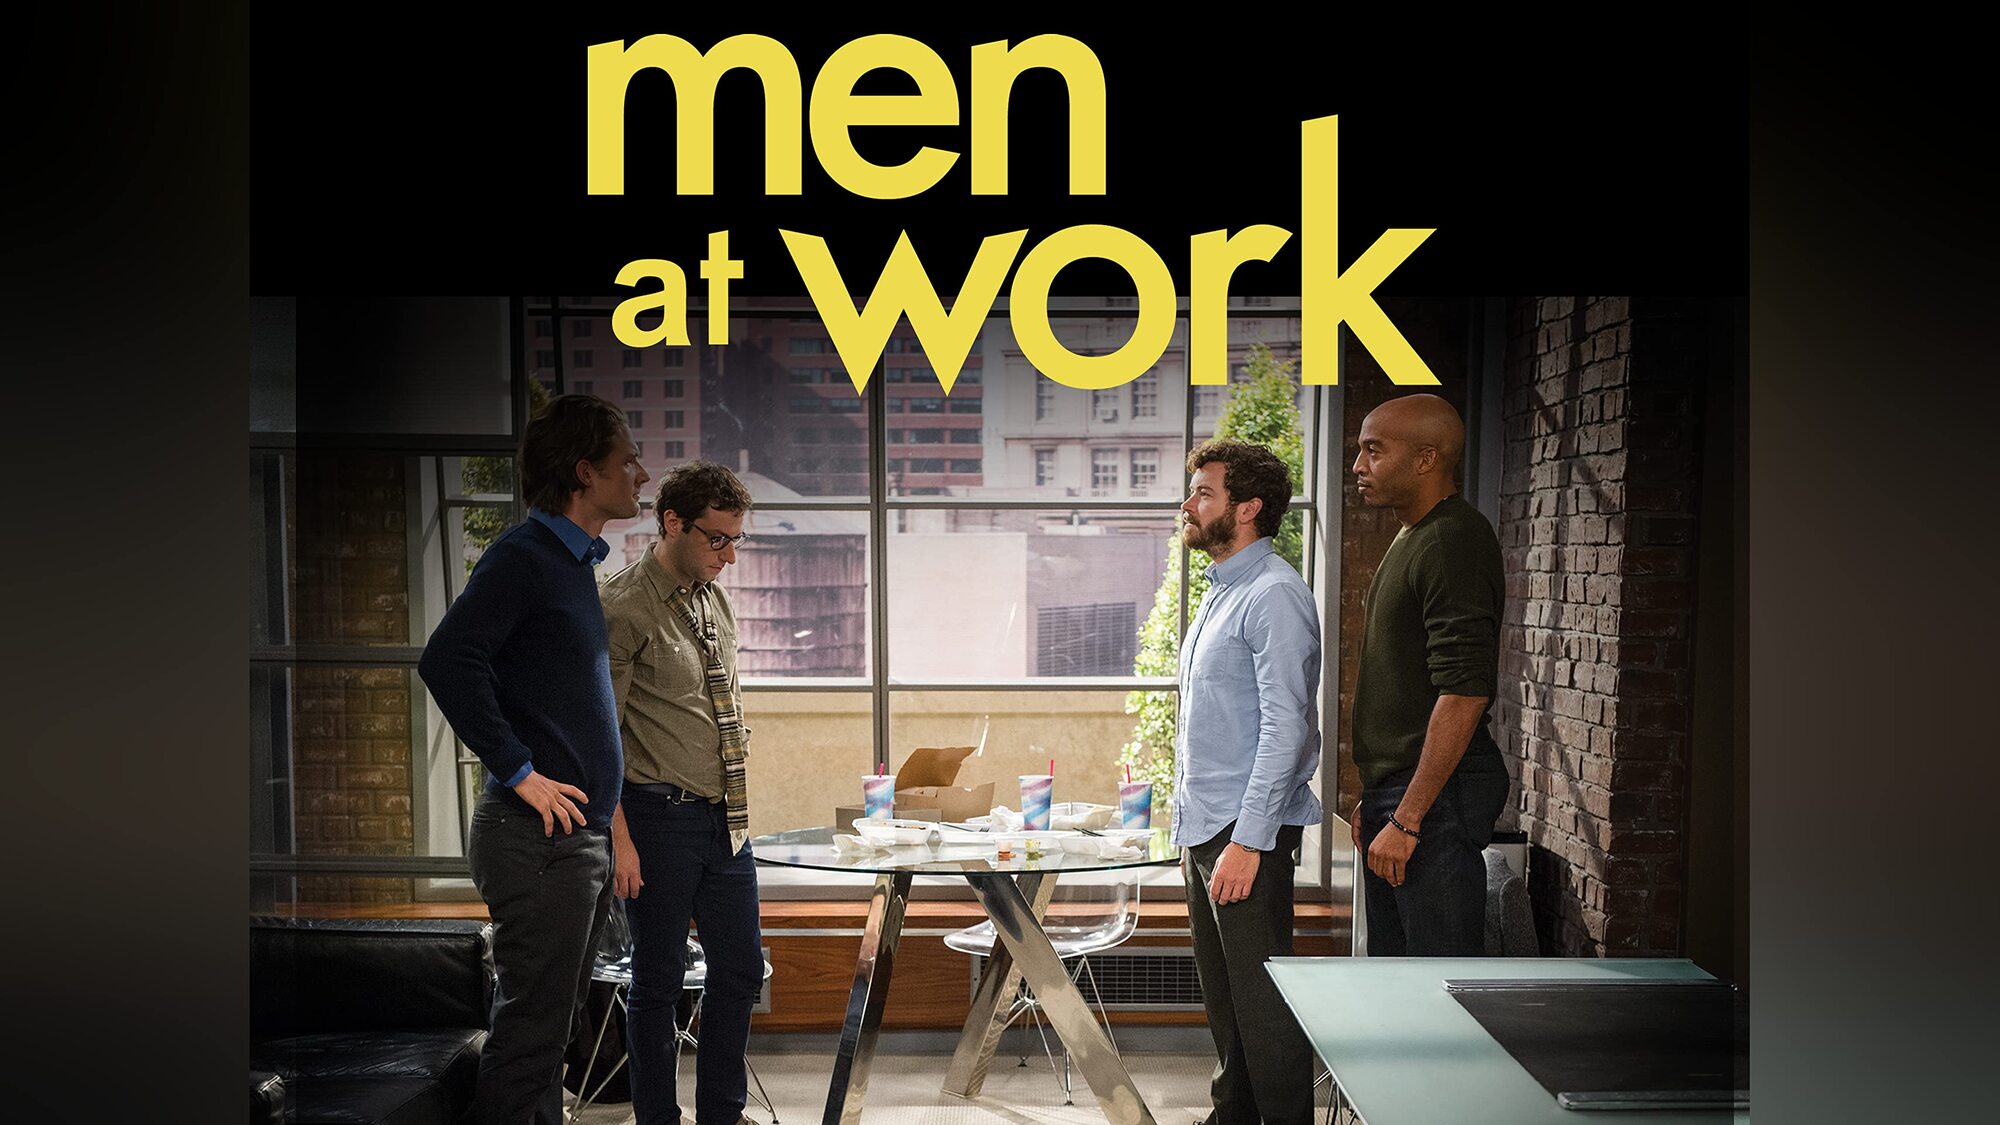 34-facts-about-the-movie-men-at-work